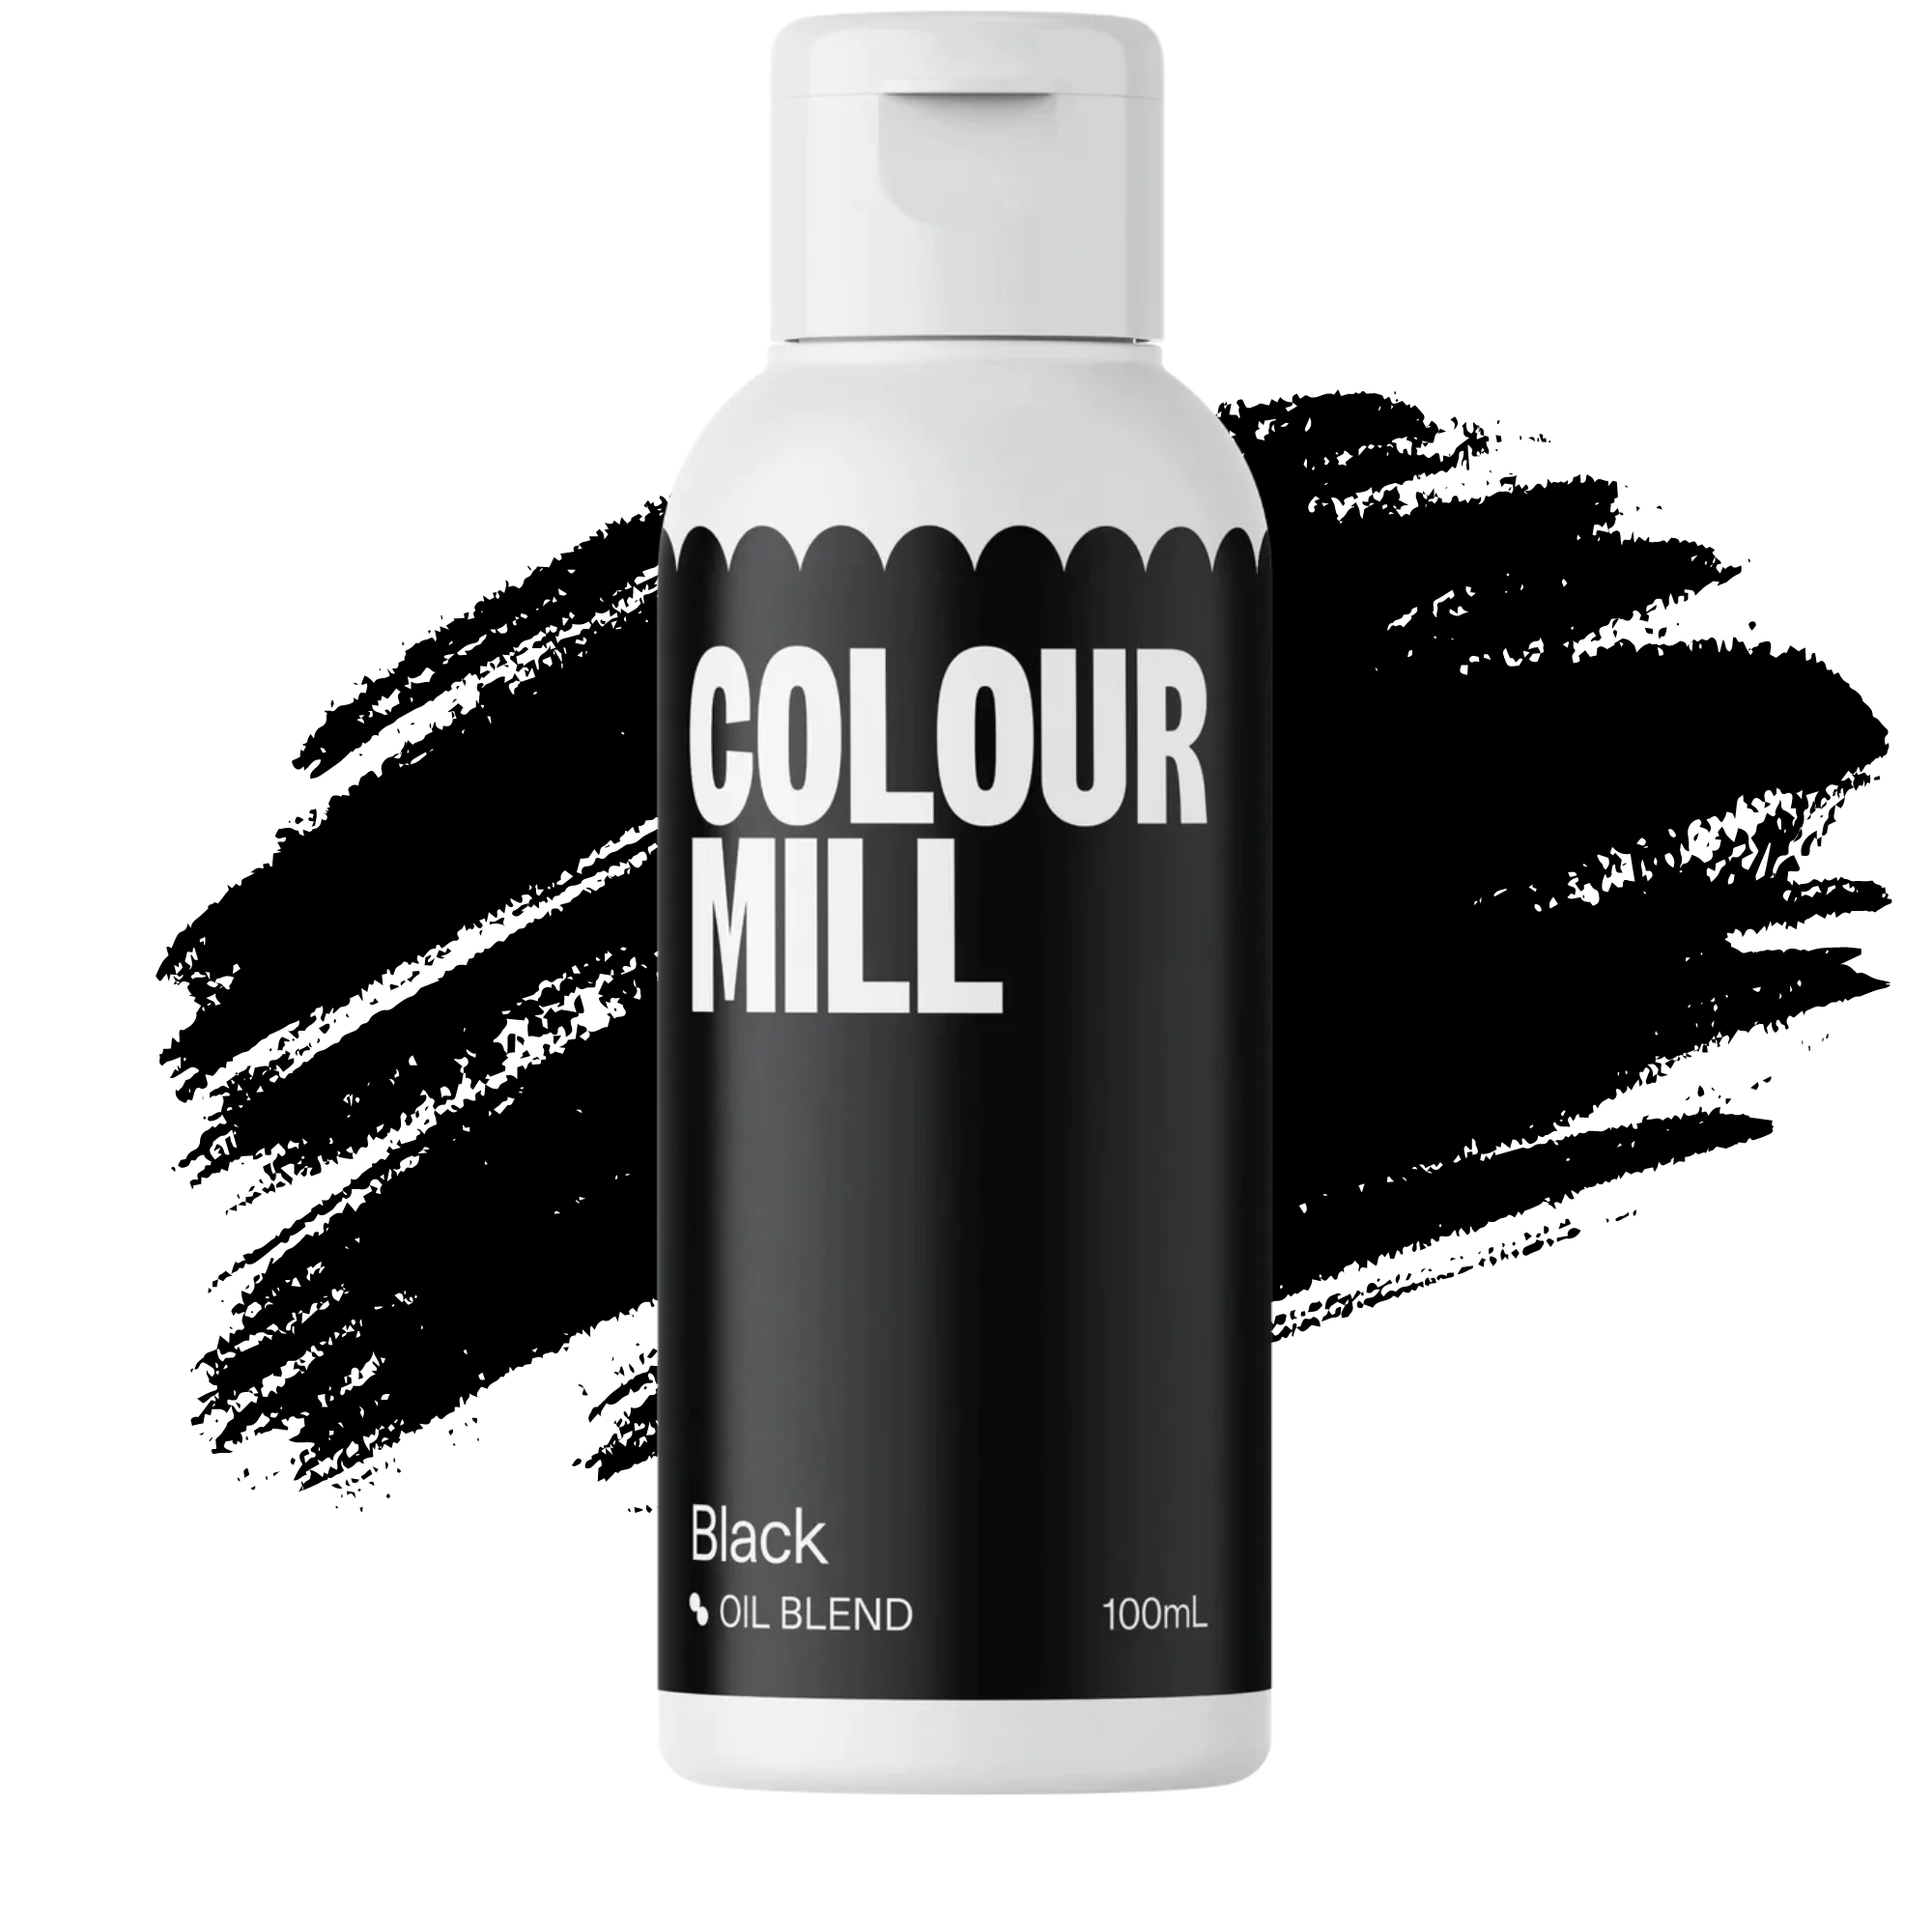 Colour Mill Black Food Colouring (Oil Based) - 100ml